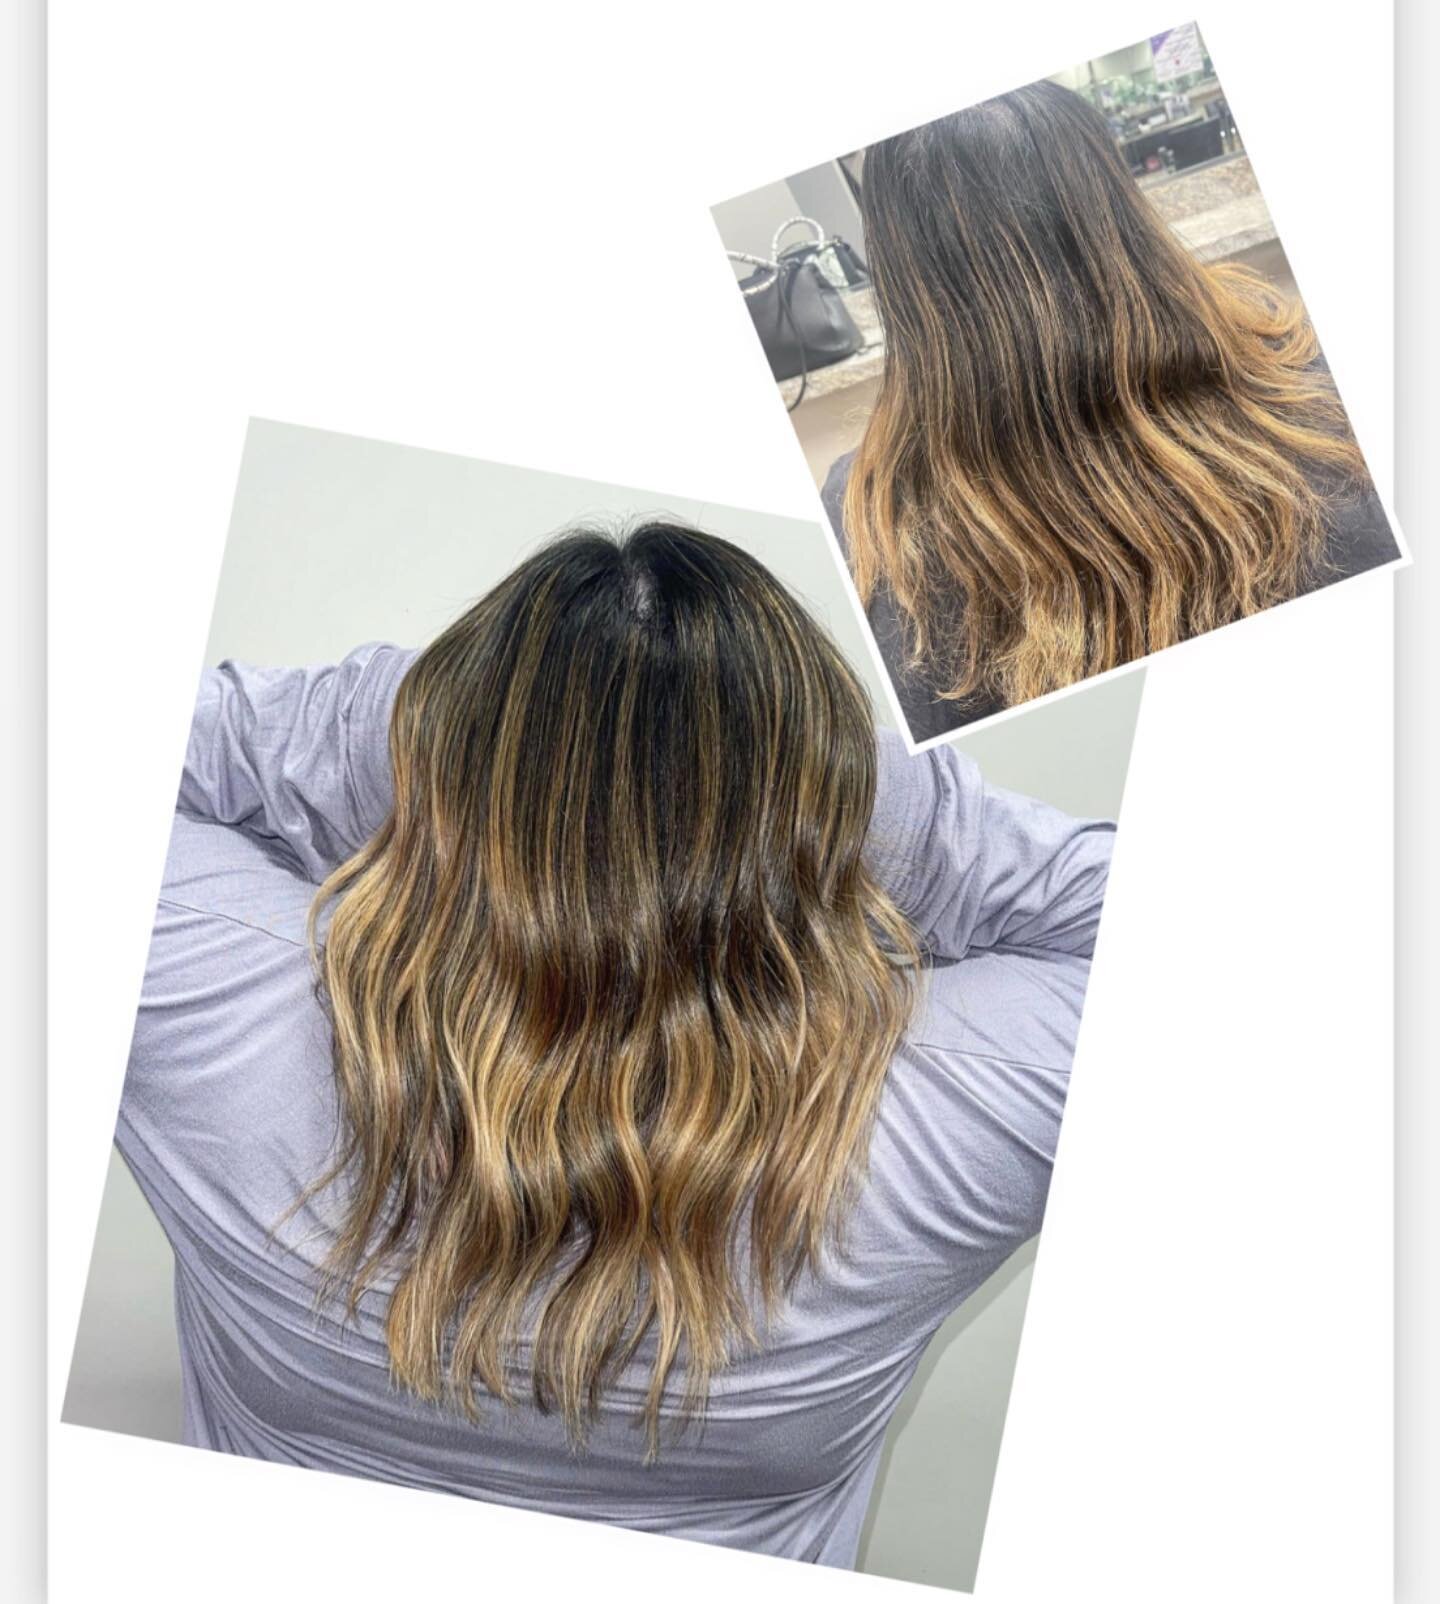 Shiny, glossy hair is in this fall! Before and after by @taylorcarrollbeauty This girly totally transformed her hair on a healthy journey to getting brighter blonder hair. 

#shinyhair #hairgoals #balayagehair #blondebalayage #redkencolorspecialist #